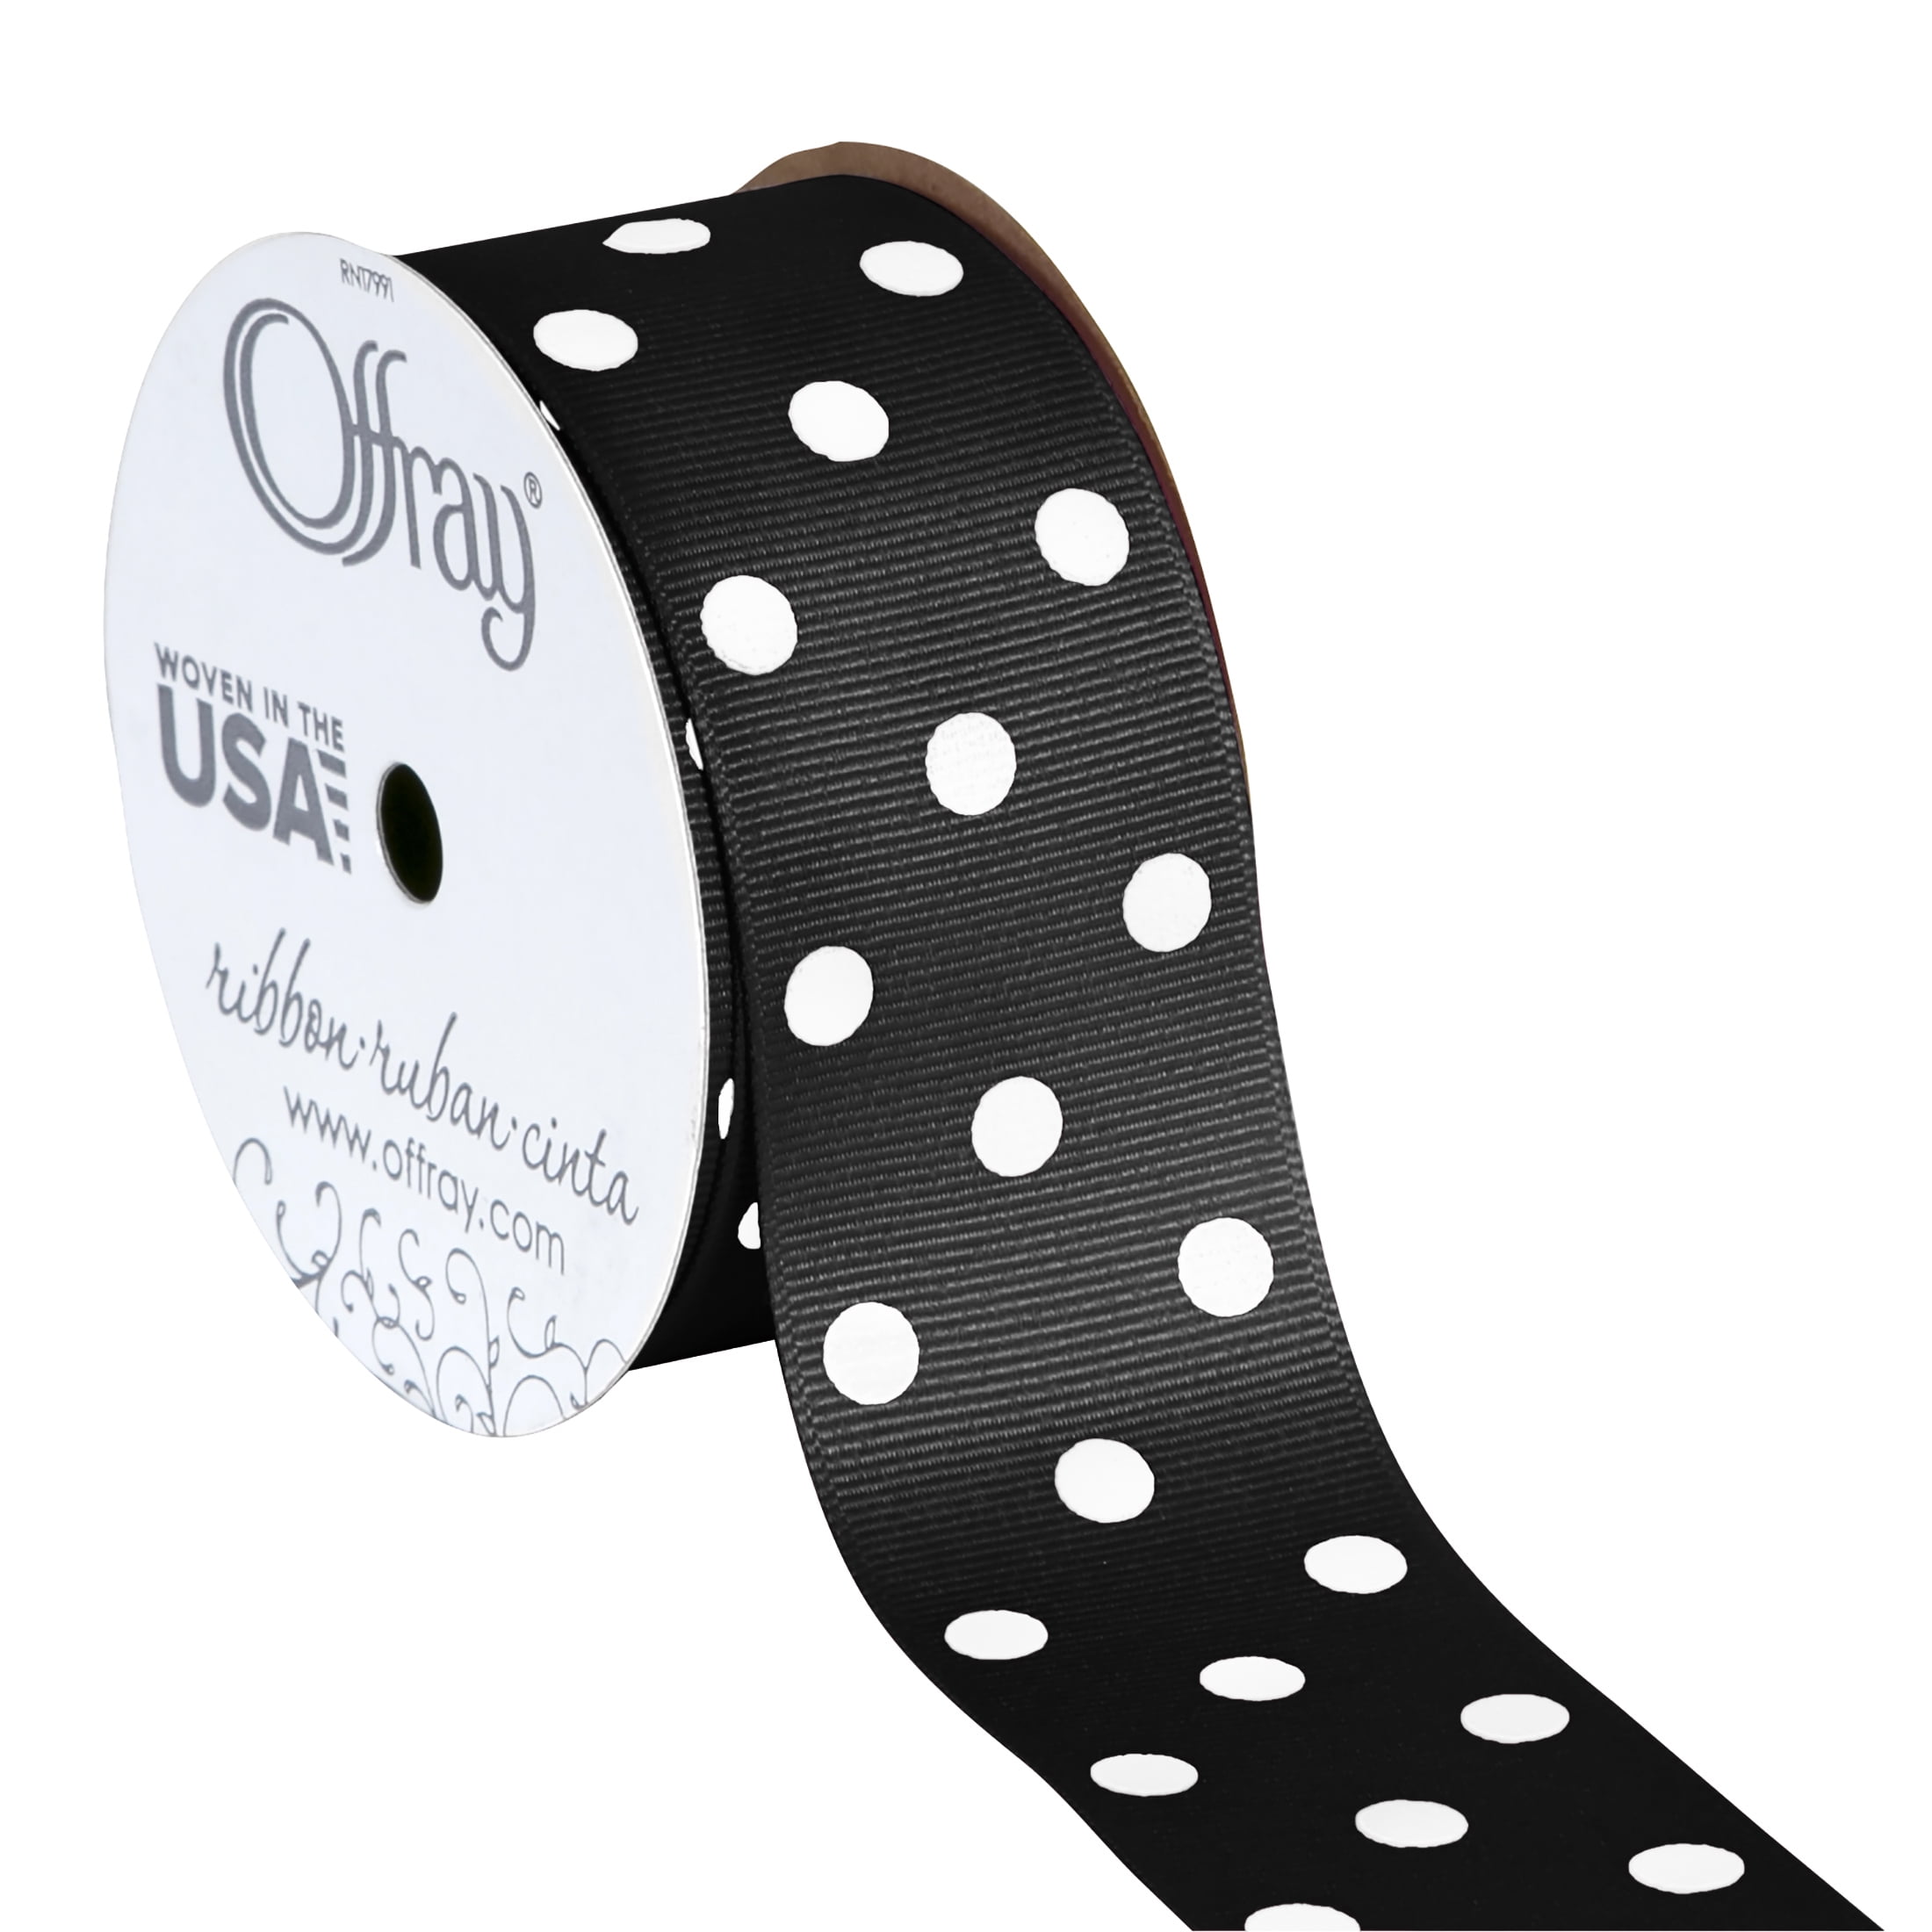 Offray Ribbon, Black with White Polka Dot 1 1/2 inch Grosgrain Polyester Ribbon for Sewing, Crafts, and Gifting, 9 feet, 1 Each